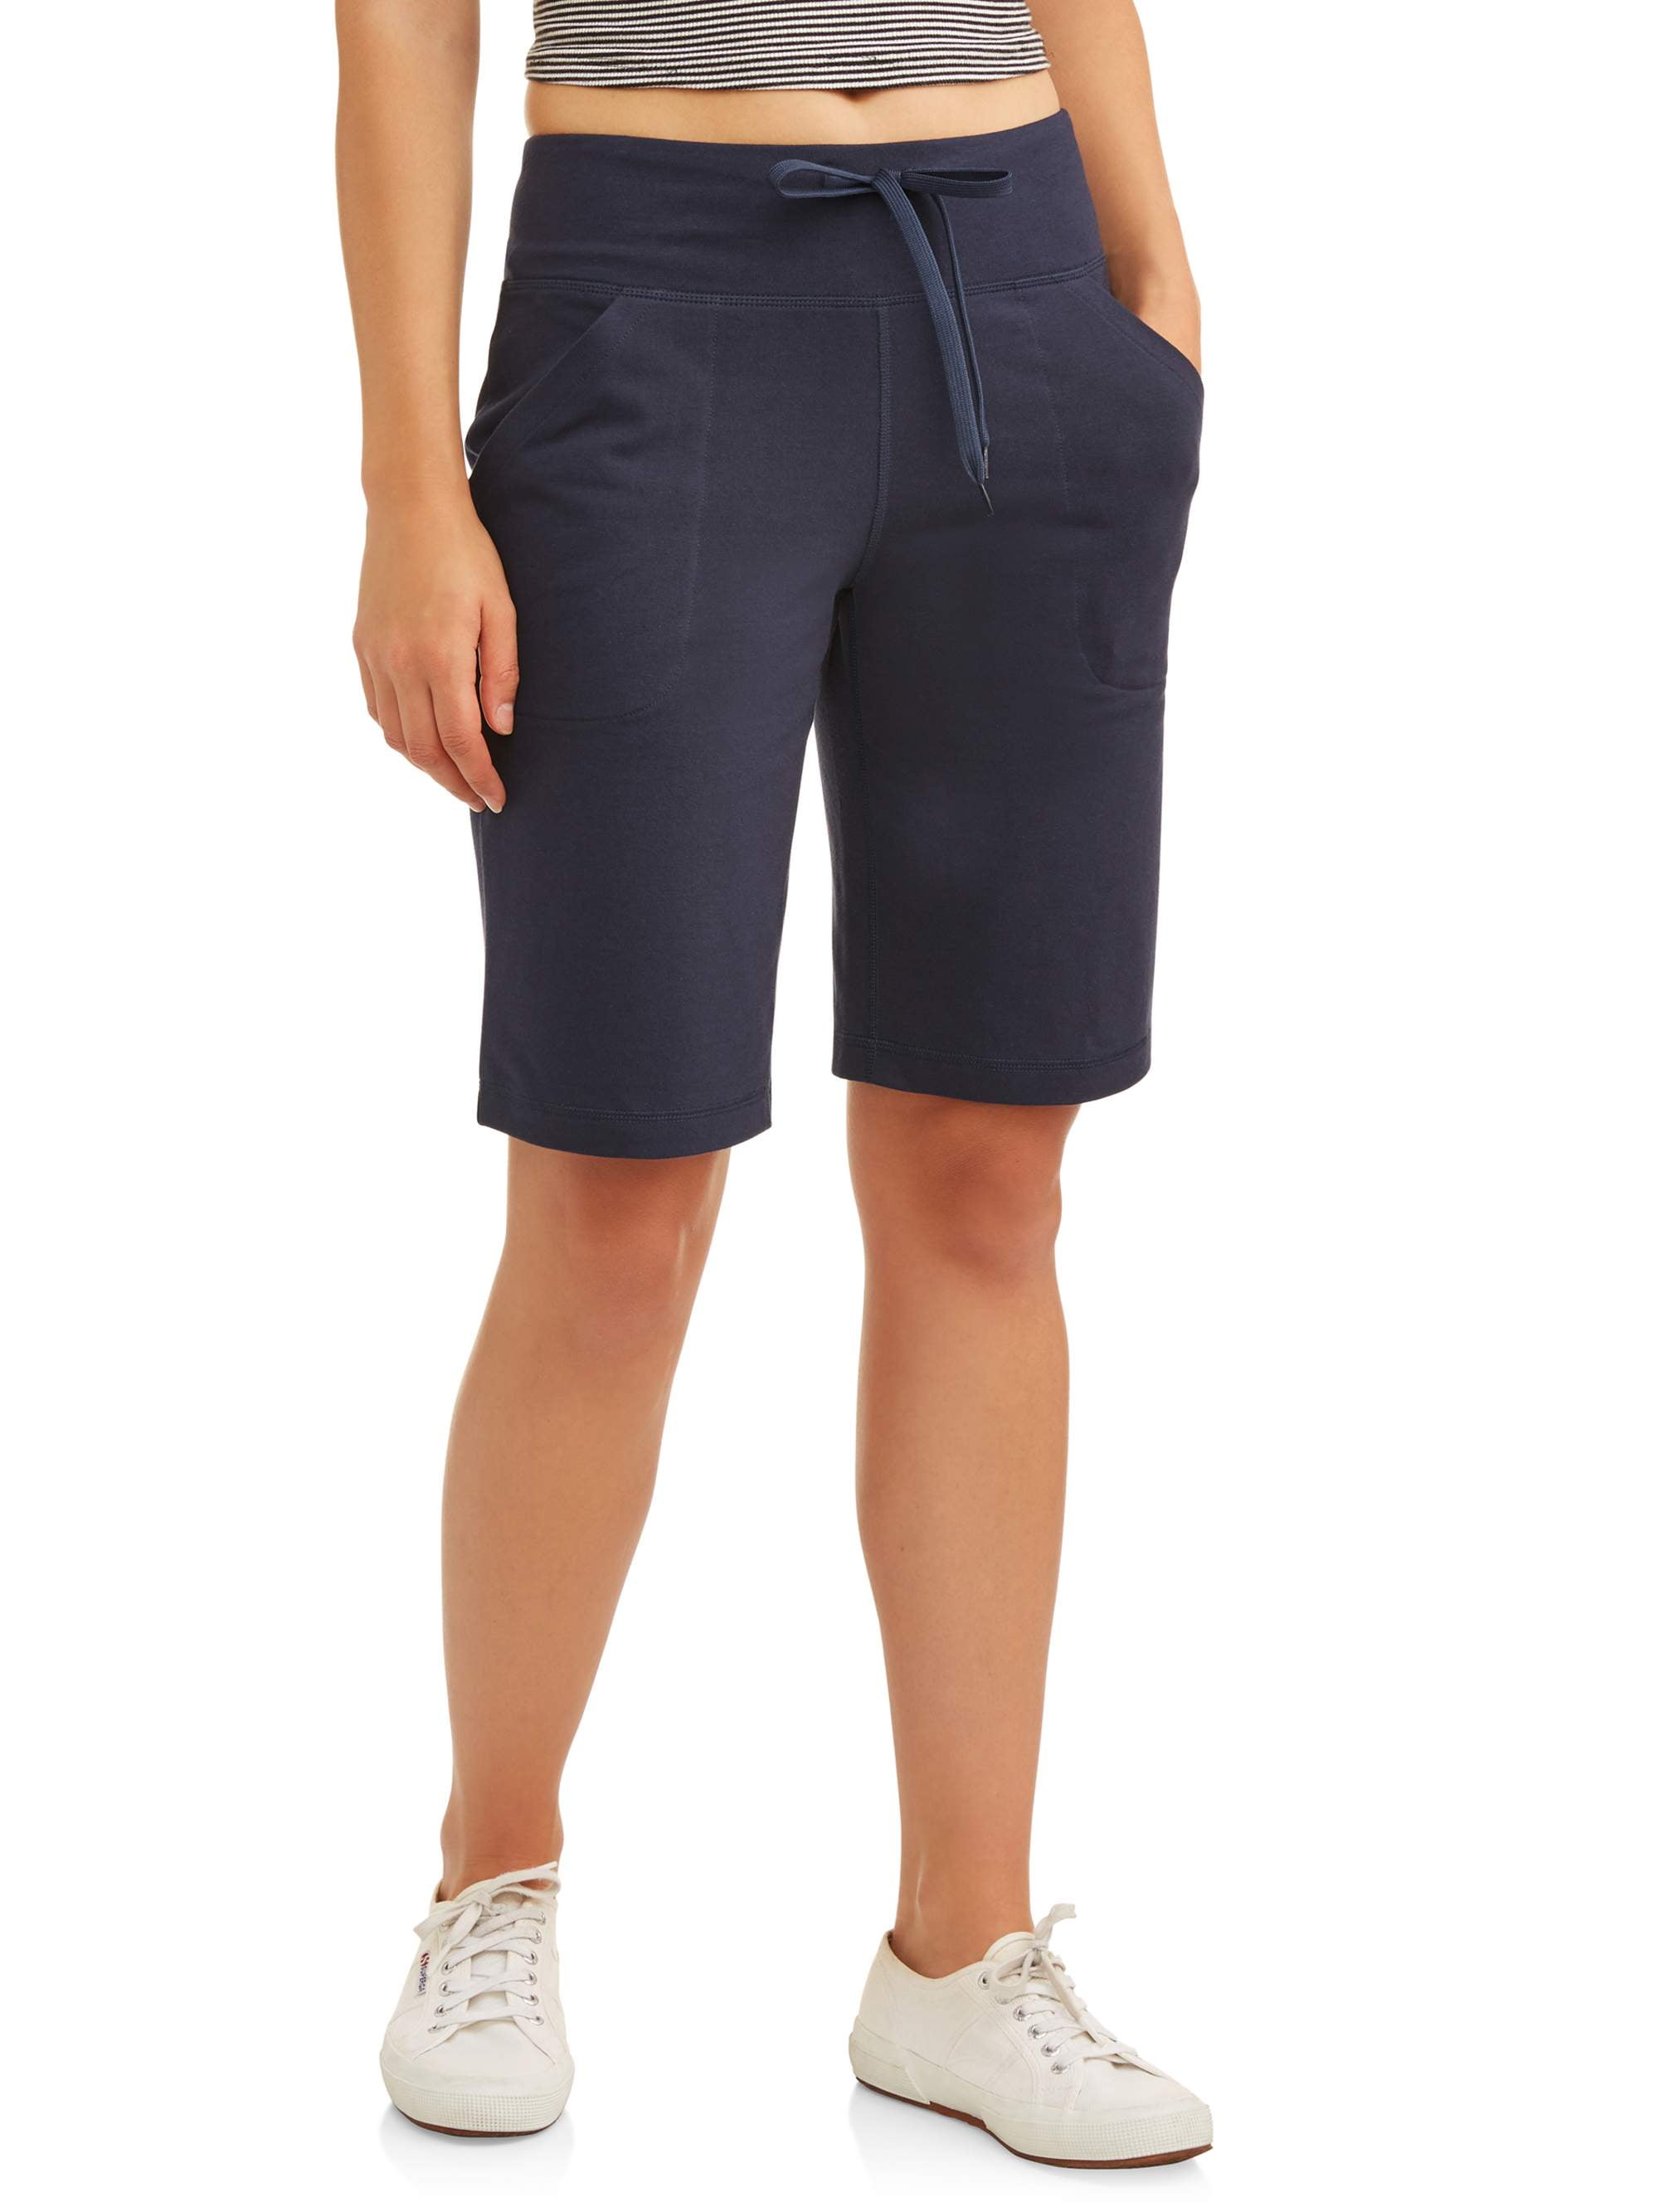 Athletic Works - Athletic Works Women's Athleisure Dri More Core Active 12